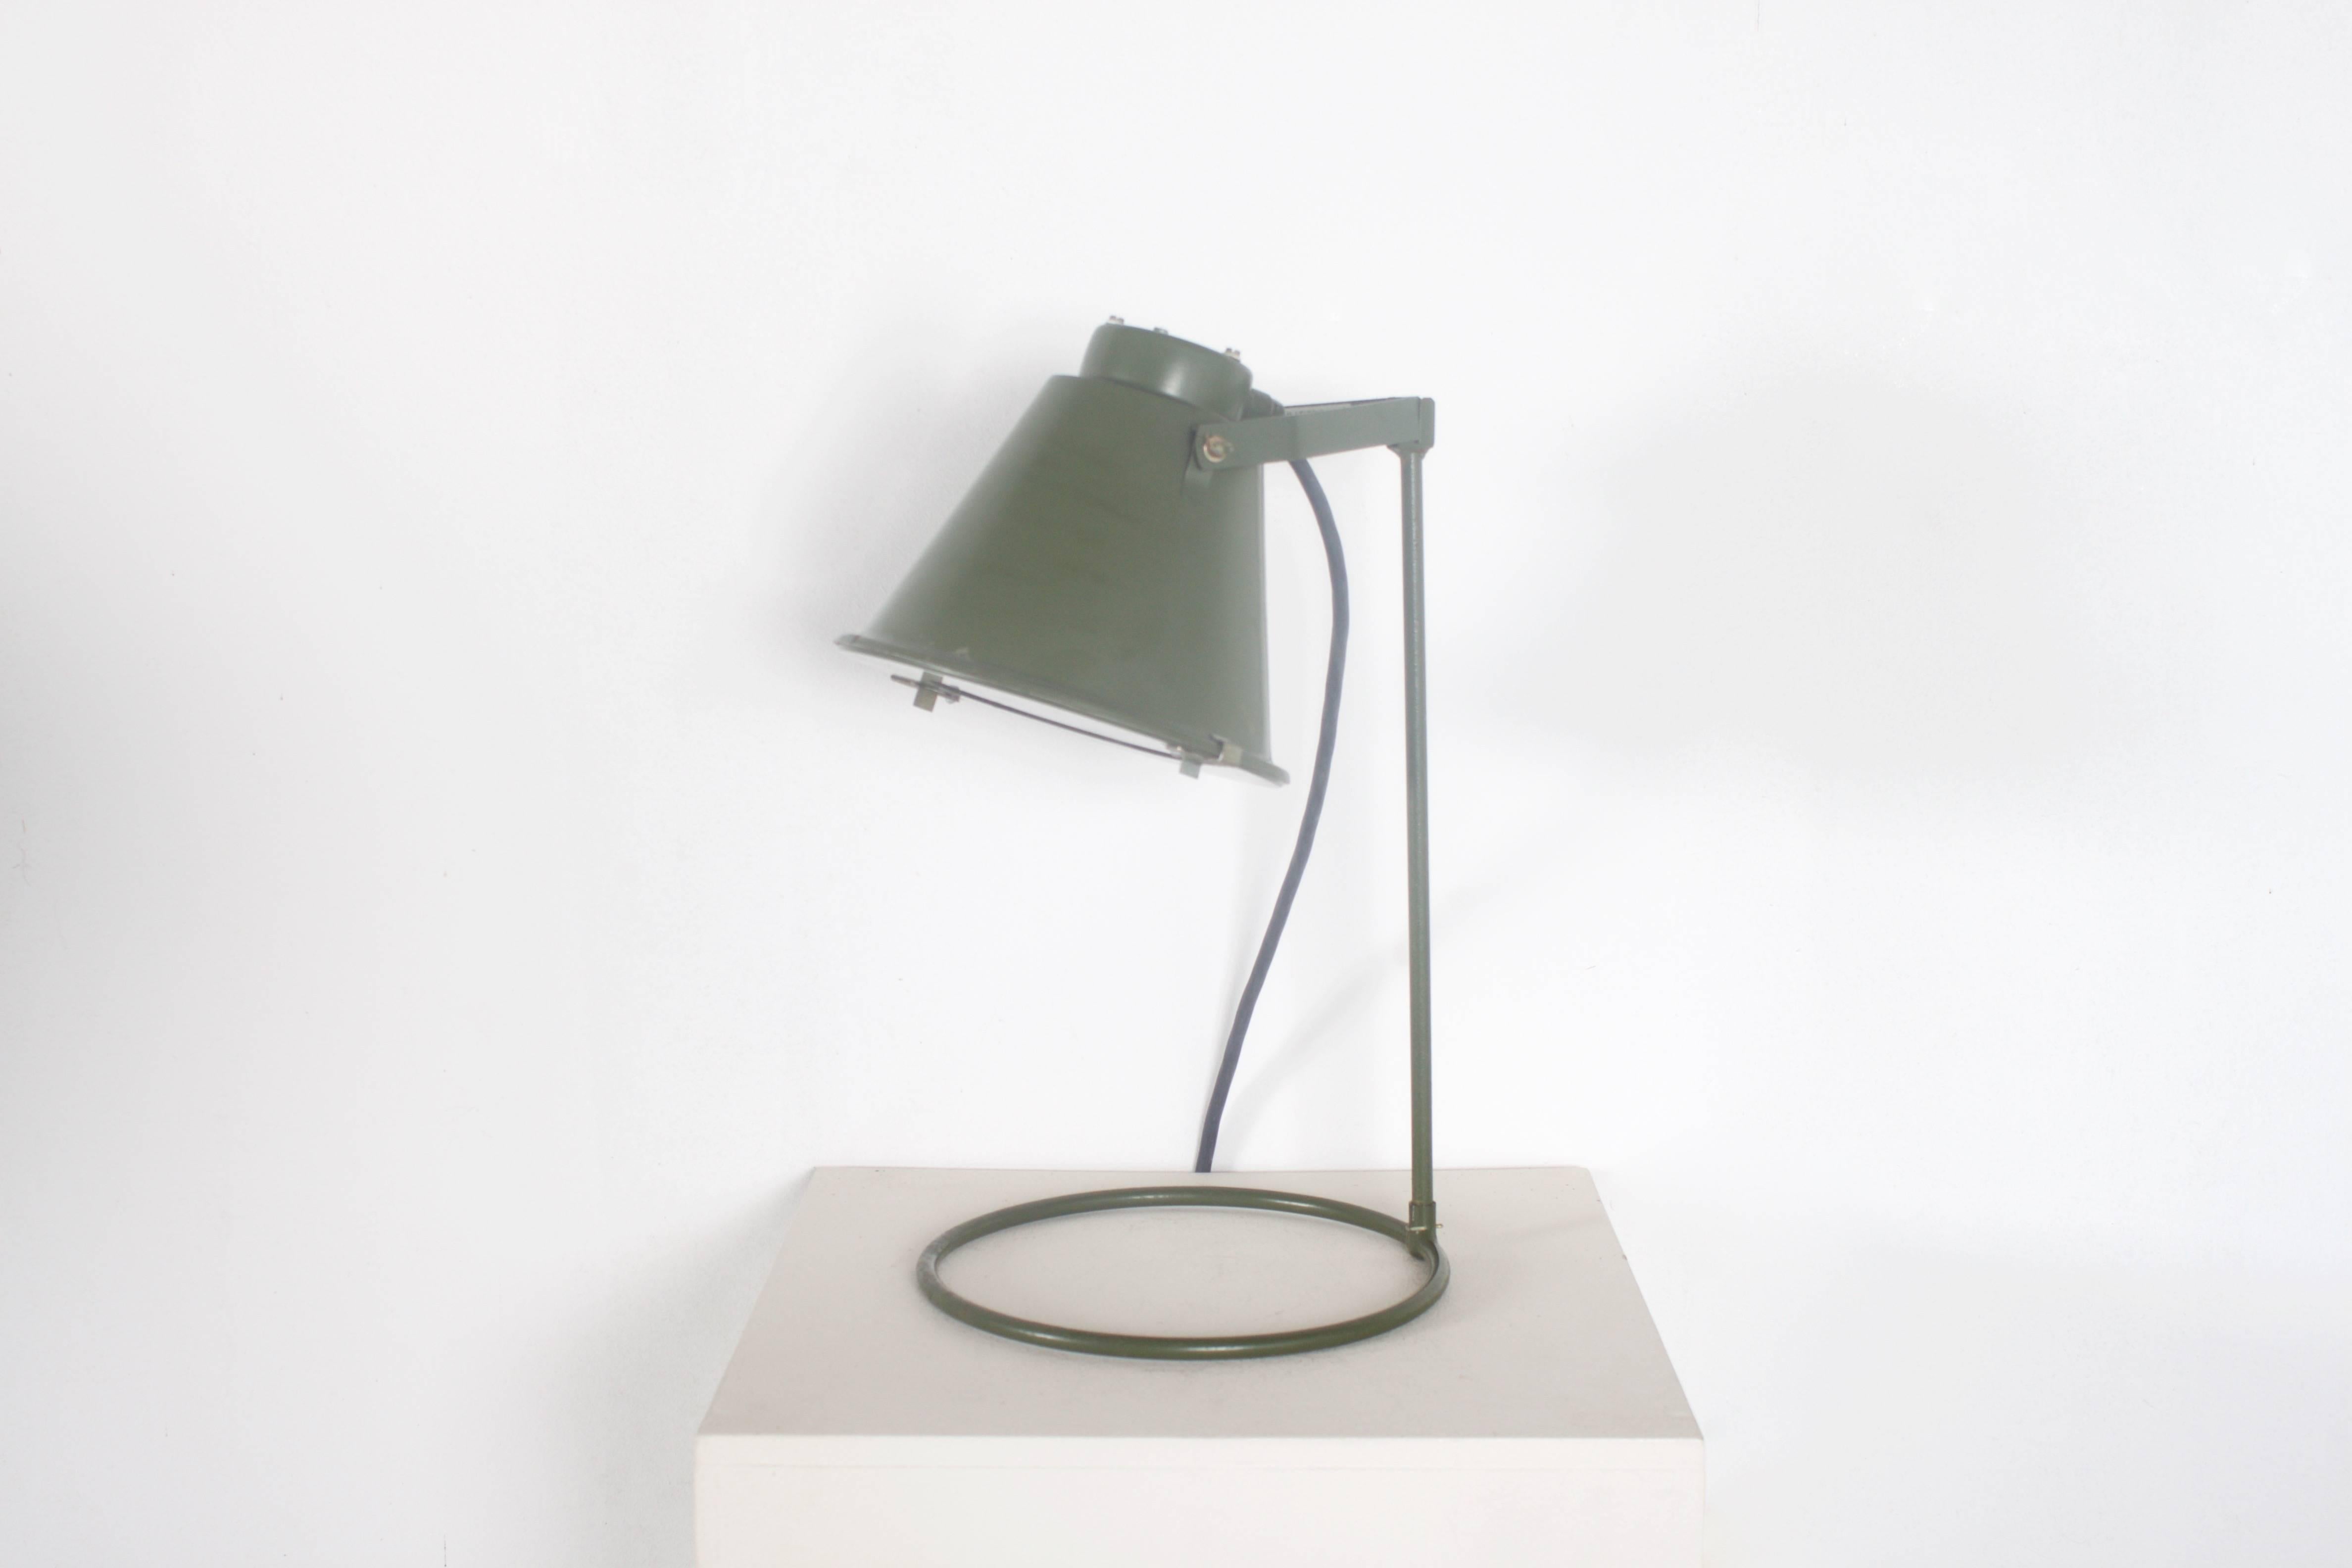 Mid-Century Modern 1/4 Rare 1970s Military Landing Zone Lamp from East Germany For Sale